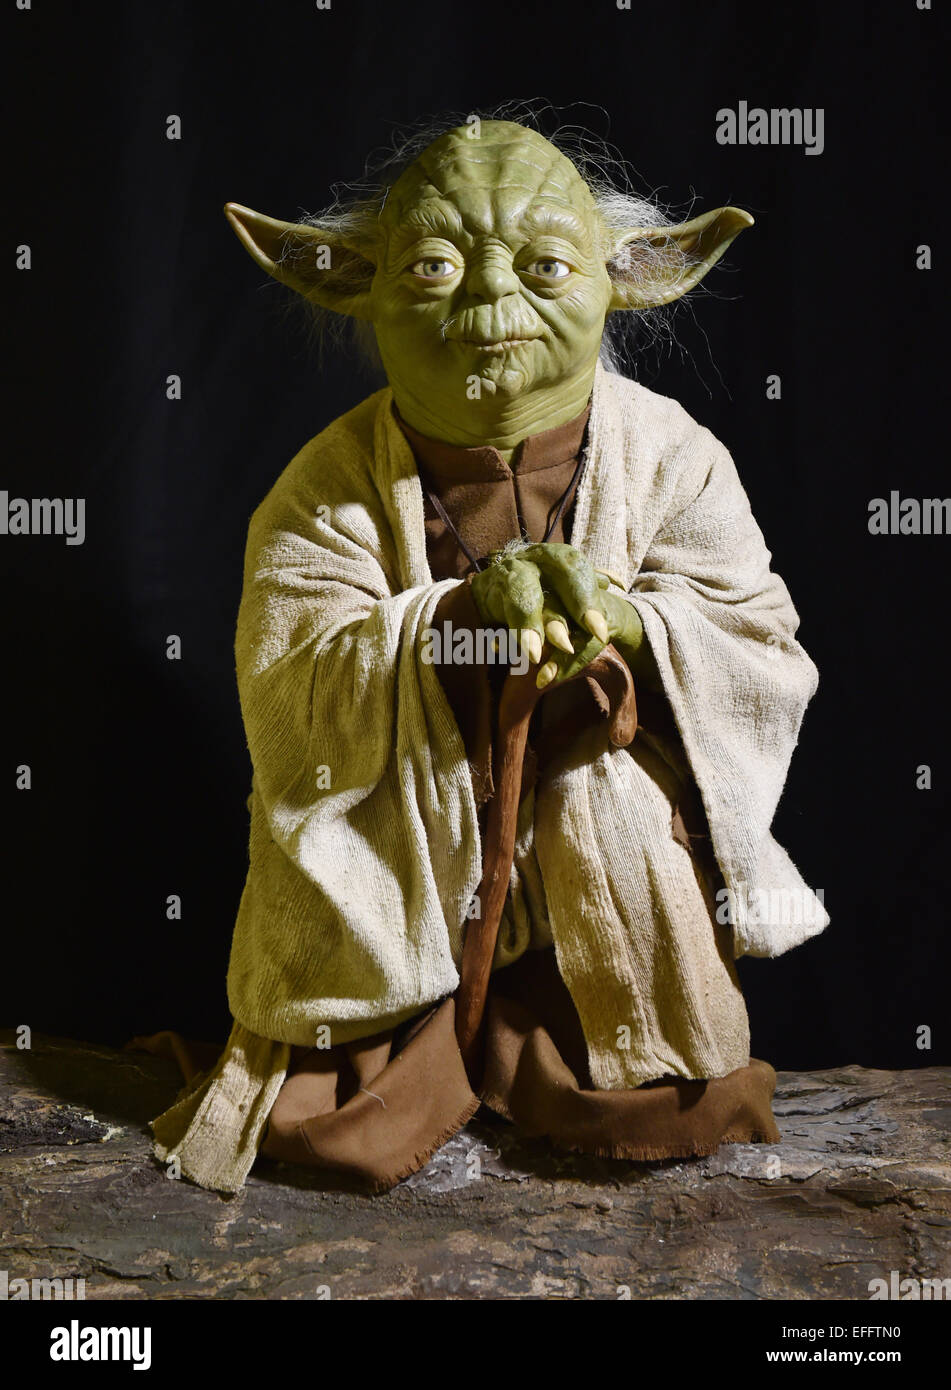 Berlin, Germany. 02nd Feb, 2015. The wax figure of Star Wars hero Yoda for the London Madame Tussauds in the wax museum in Berlin, Germany, 02 February 2015. Starting in May 2015 key scenes from the Star Wars films will be shown on authentic and accessible sets at the Berlin and London Madame Tussauds museums. Photo: JENS KALAENE/dpa/Alamy Live News Stock Photo